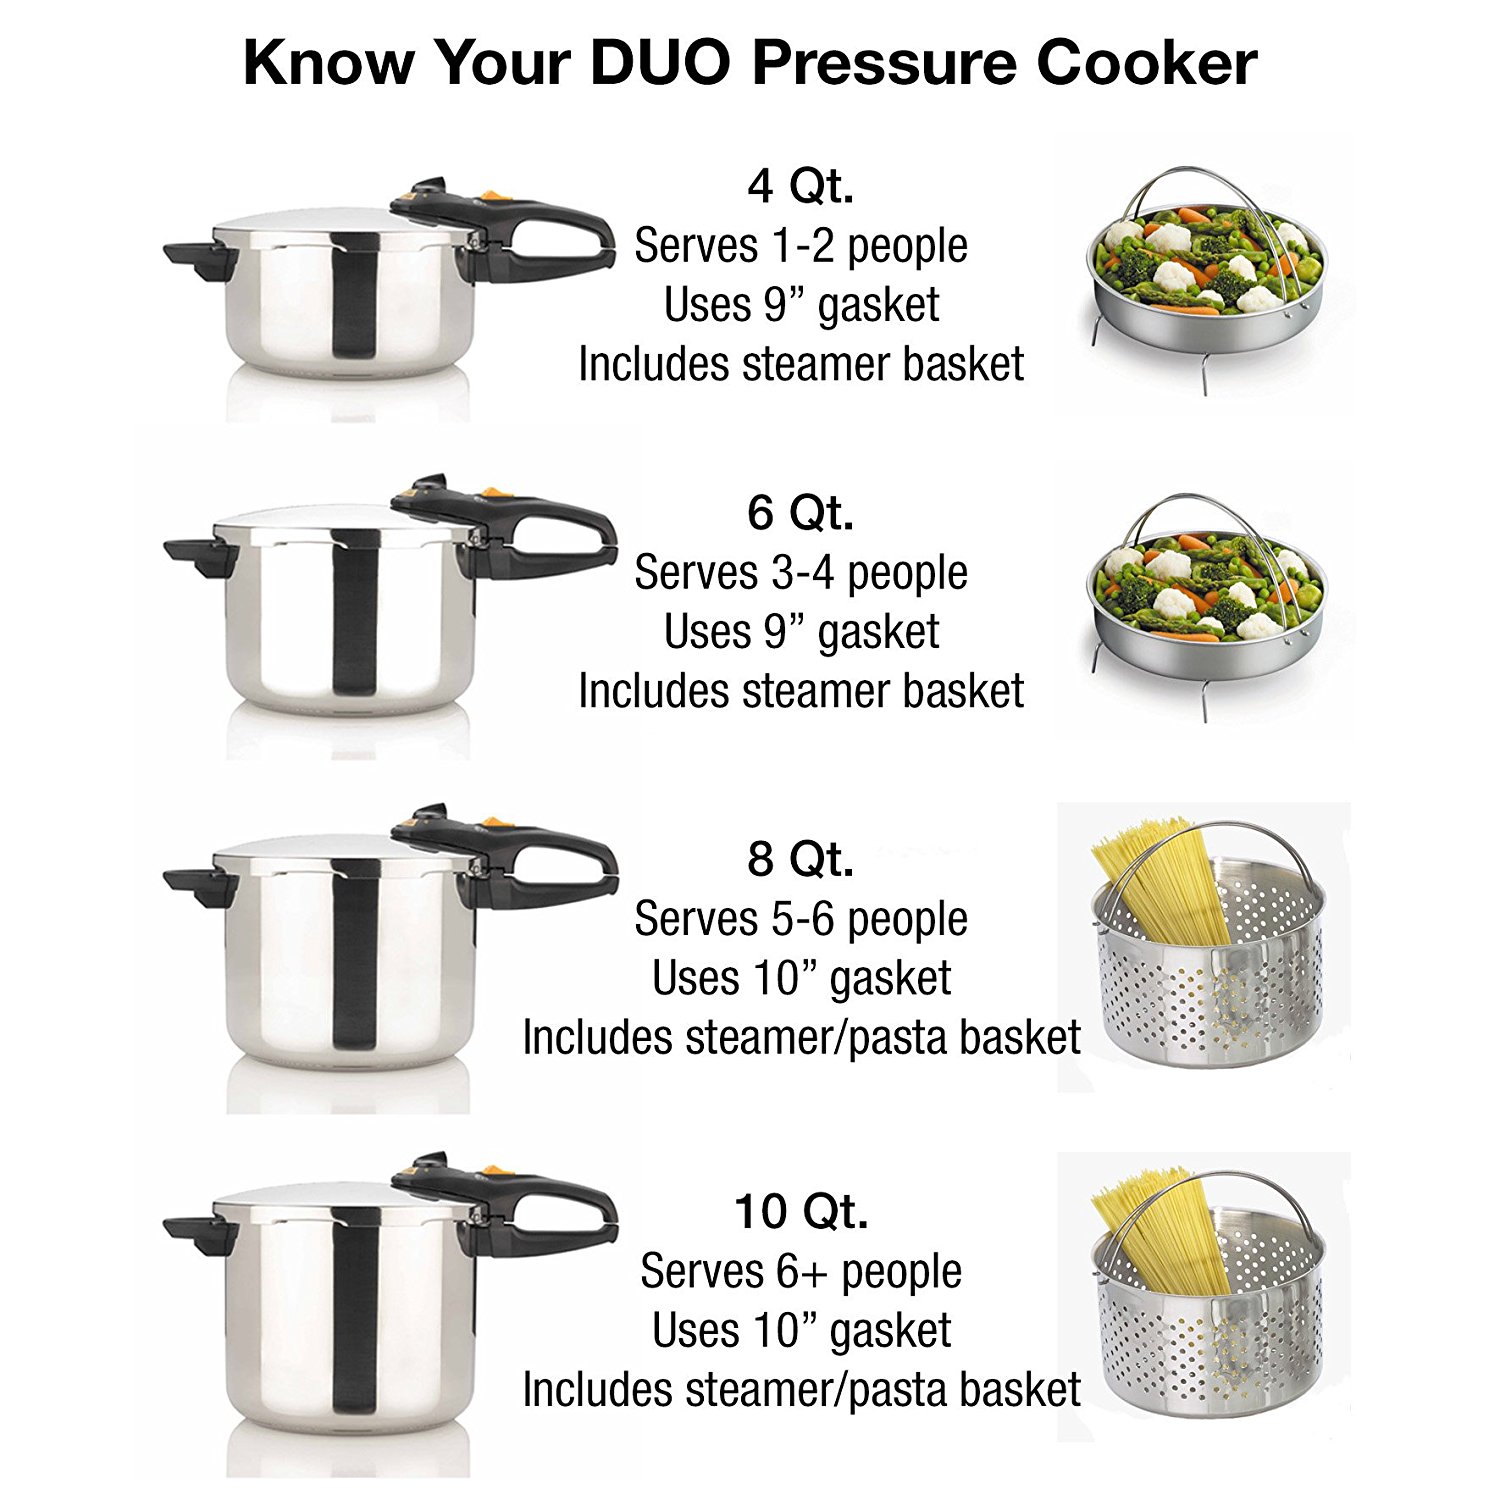 Fagor pressure cookers have 10 year warranty